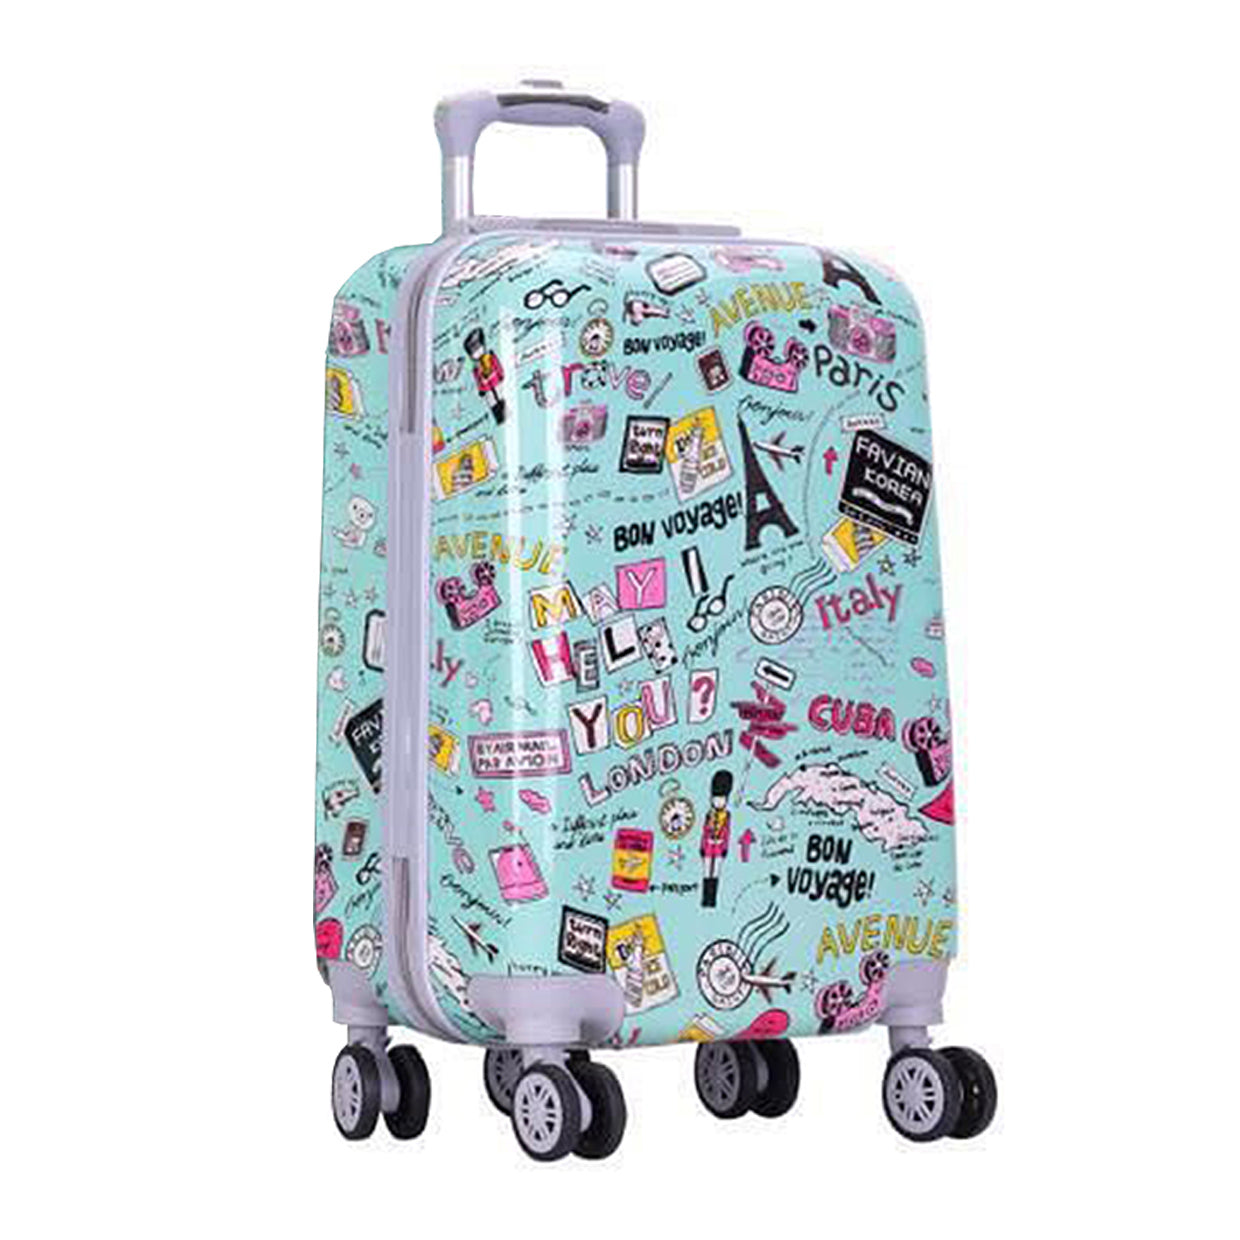 ,best quality green luggage sets, ,Green paris  luggage tags 4 wheels , ,green luggage carry on, ,green luggage abs material, ,green paris luggage dubai online shoping, ,Best quality green luggage , ,cheap rate green luggage handle wrap, ,green luggage tote bag, ,green baggage set b case,10 kg,20 kg,35 kg,, ,hand green luggage, ,Carry on  green luggage, ,Buy  green paris luggage online ,Zaappy luggage,best suitcase dubai,hand trolley sets